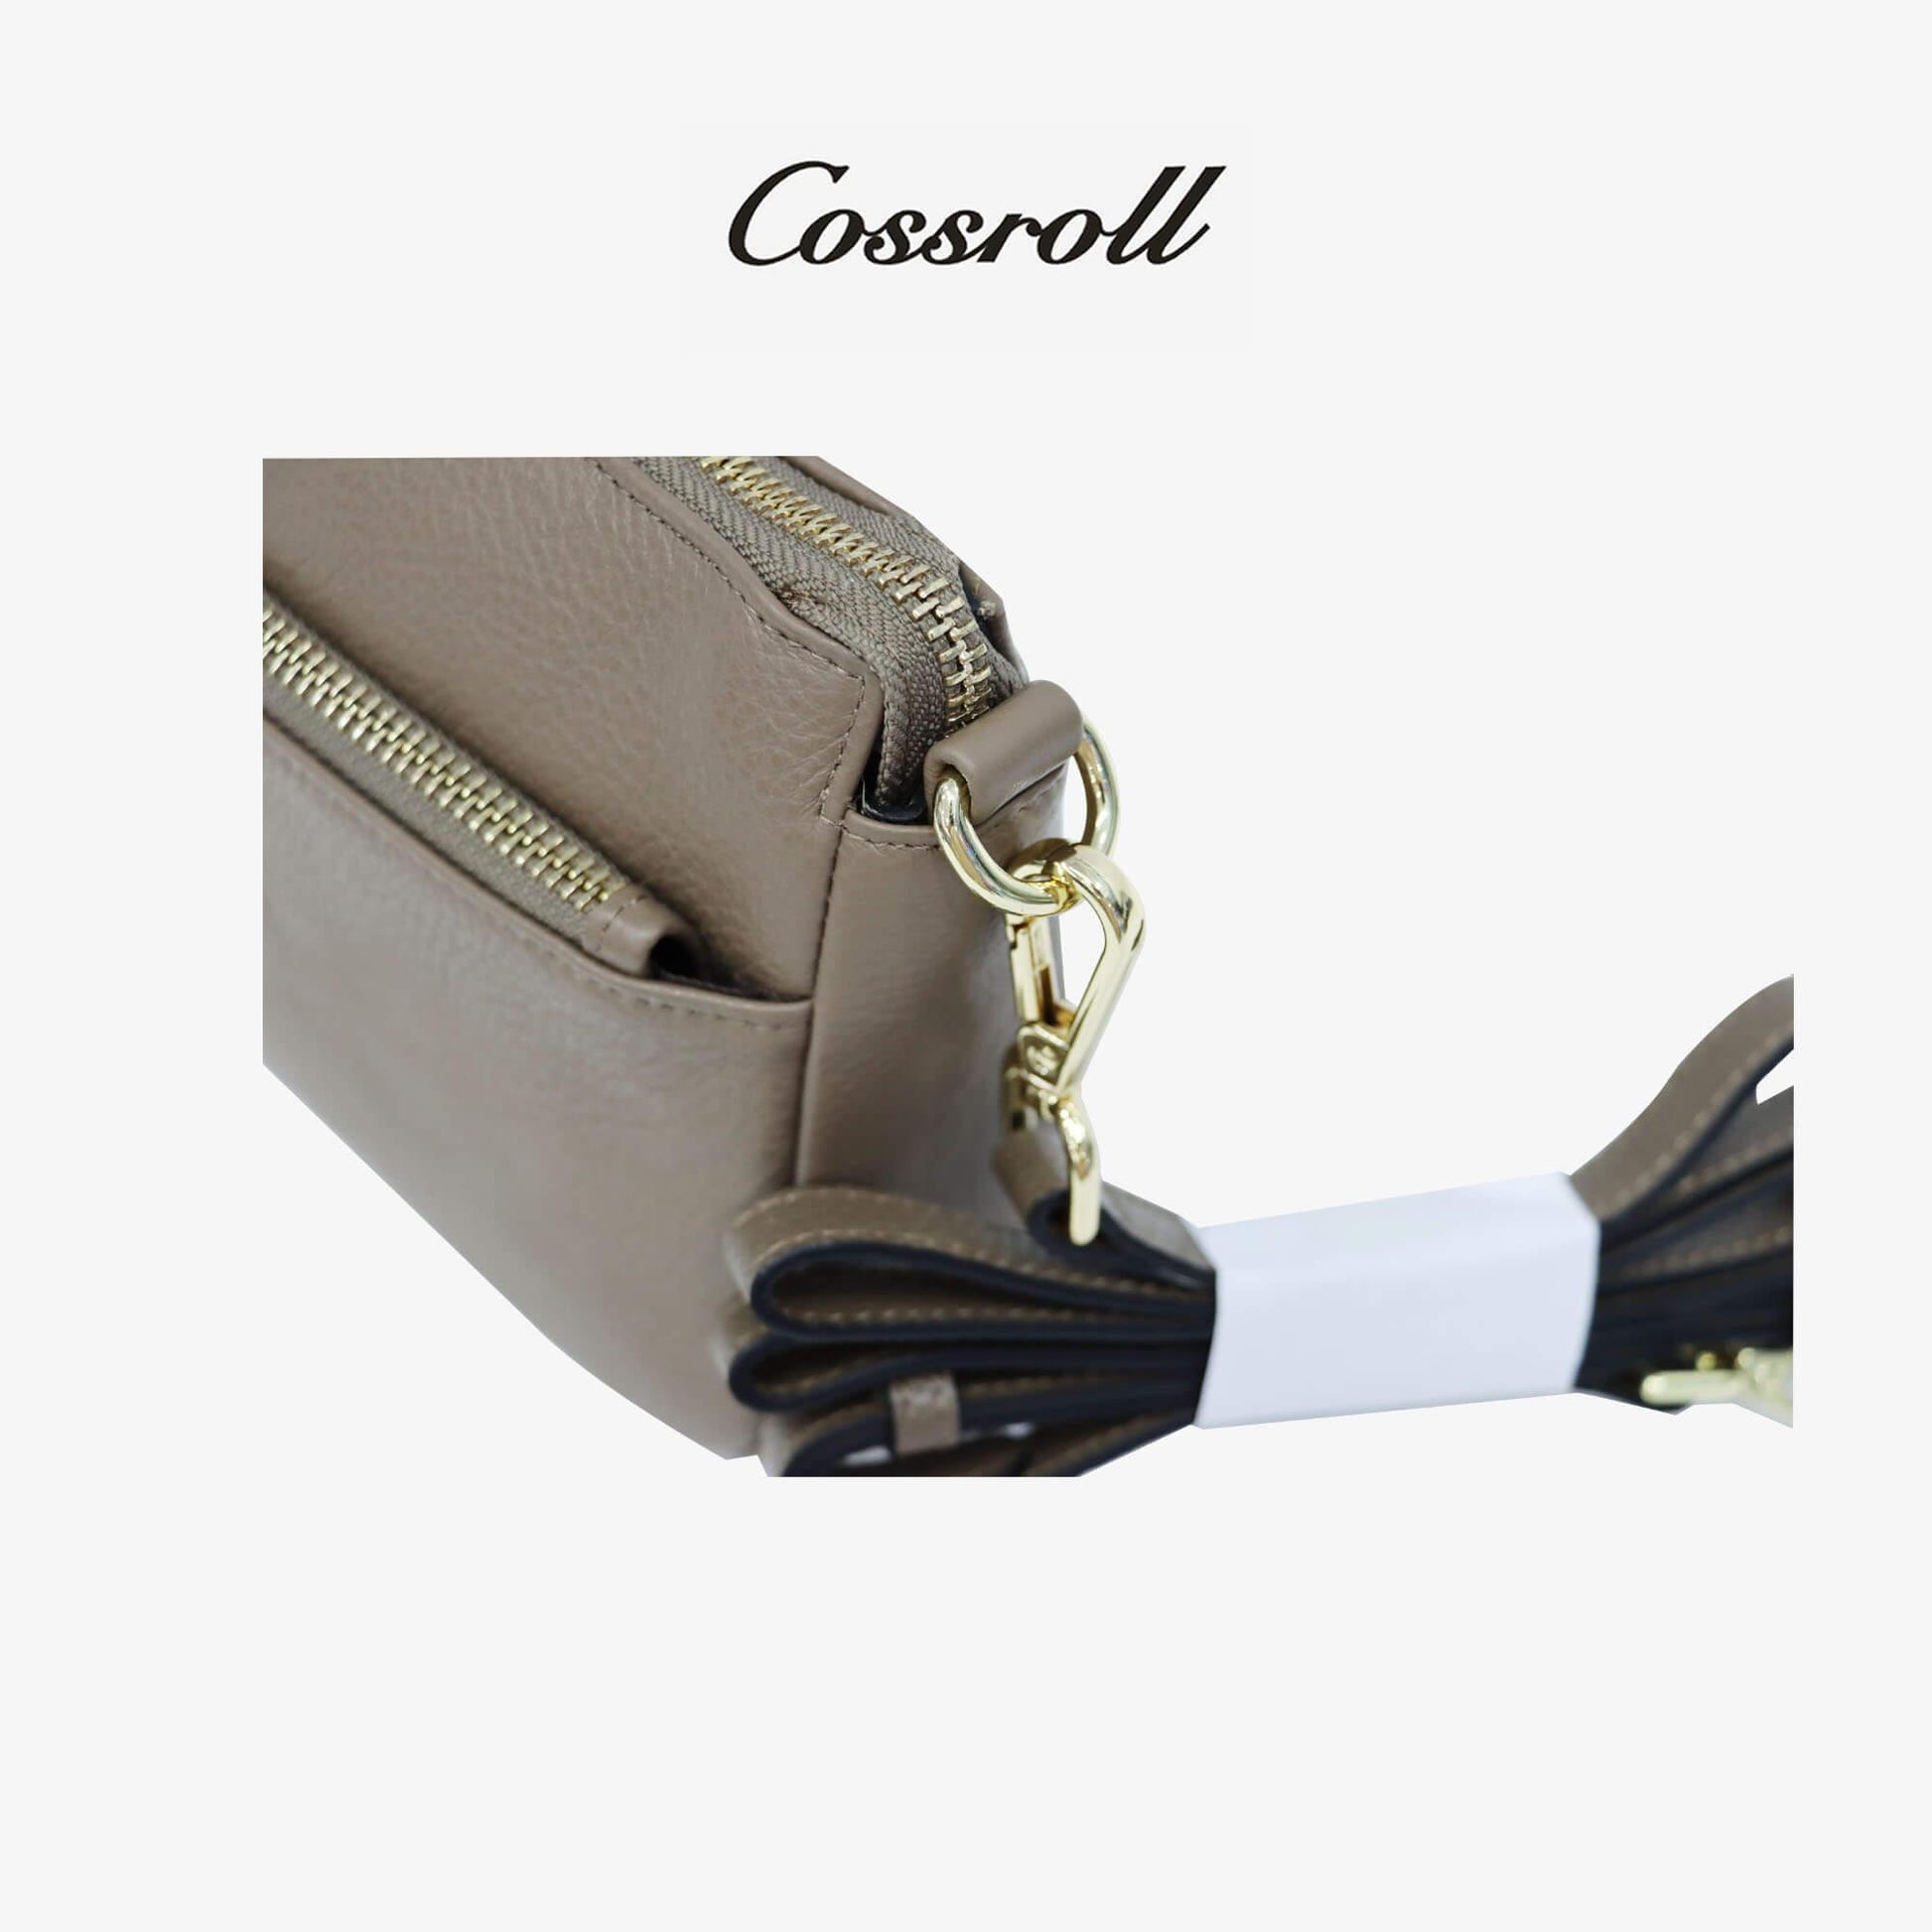 Cossroll Leather Crossbody Bag For Womens - cossroll.leather